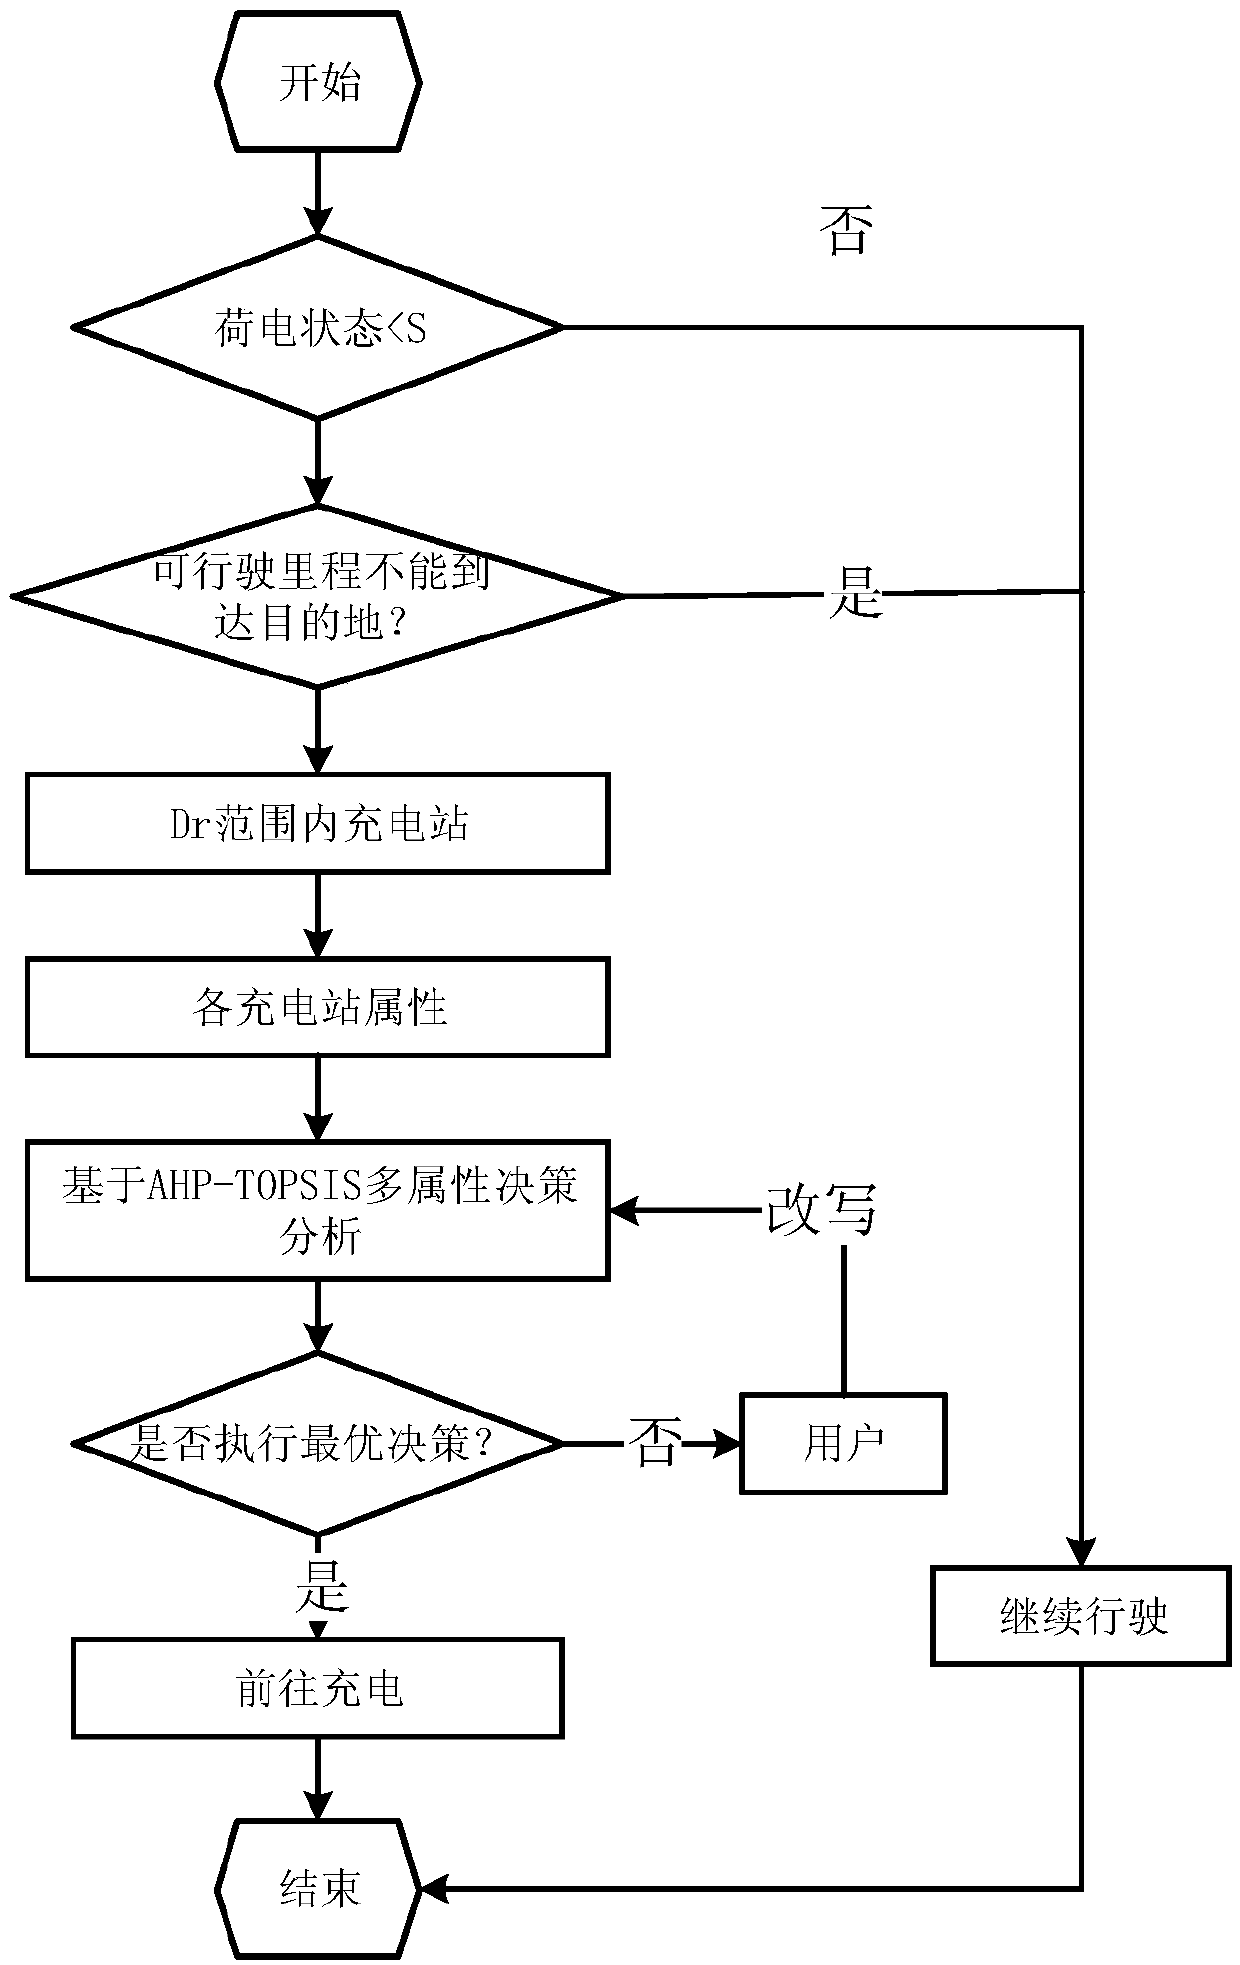 Electric car user charging selecting auxiliary decision-making method taking power transmission congestion into account